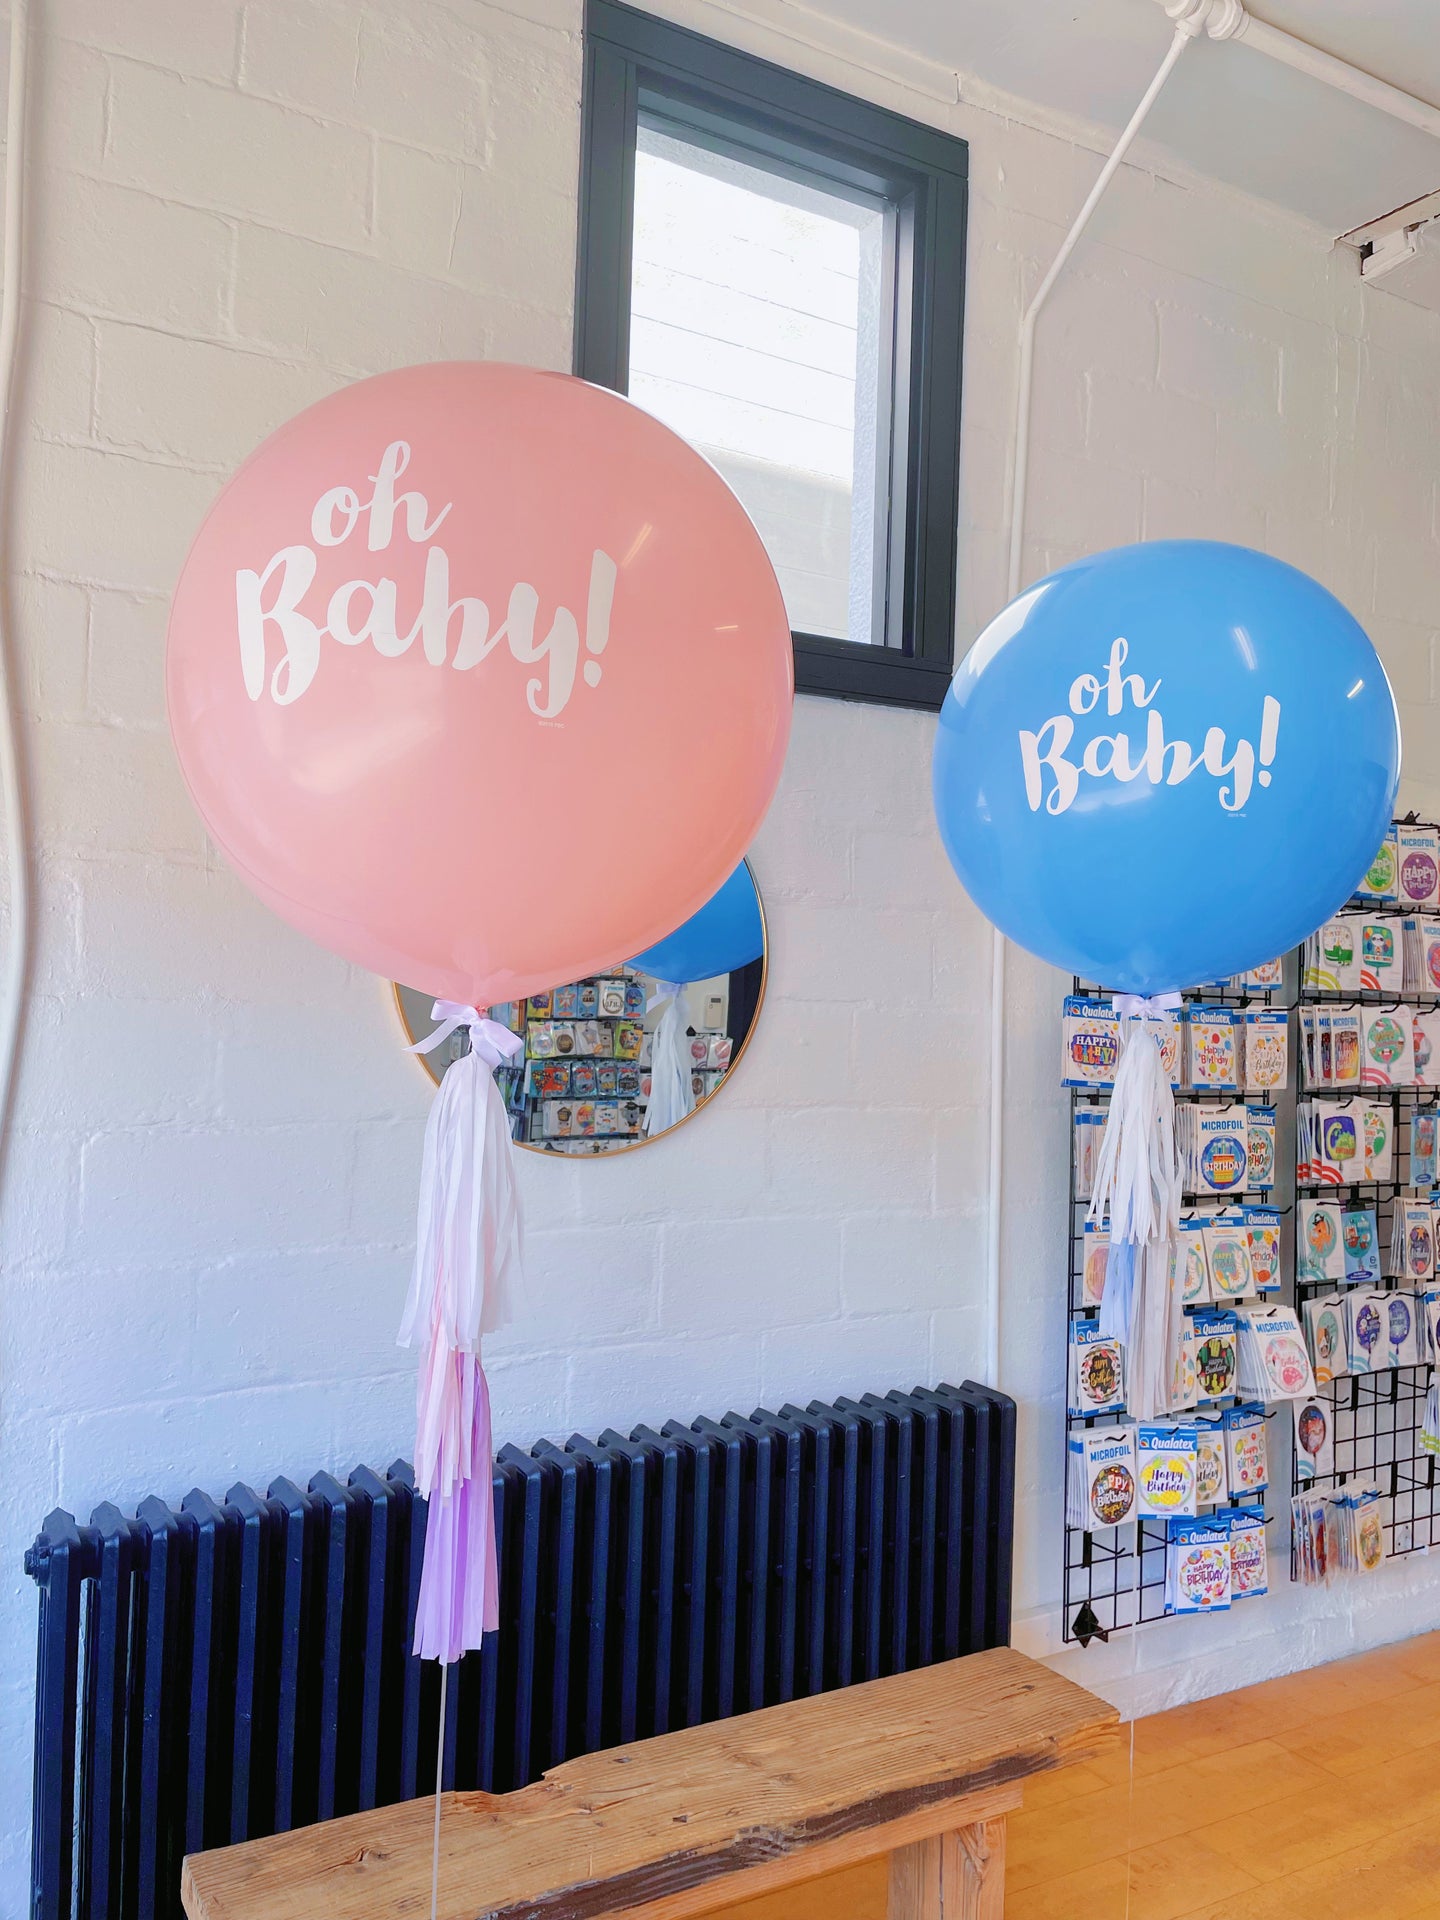 Oh Baby! 3ft Printed Balloon with matching tassels Package